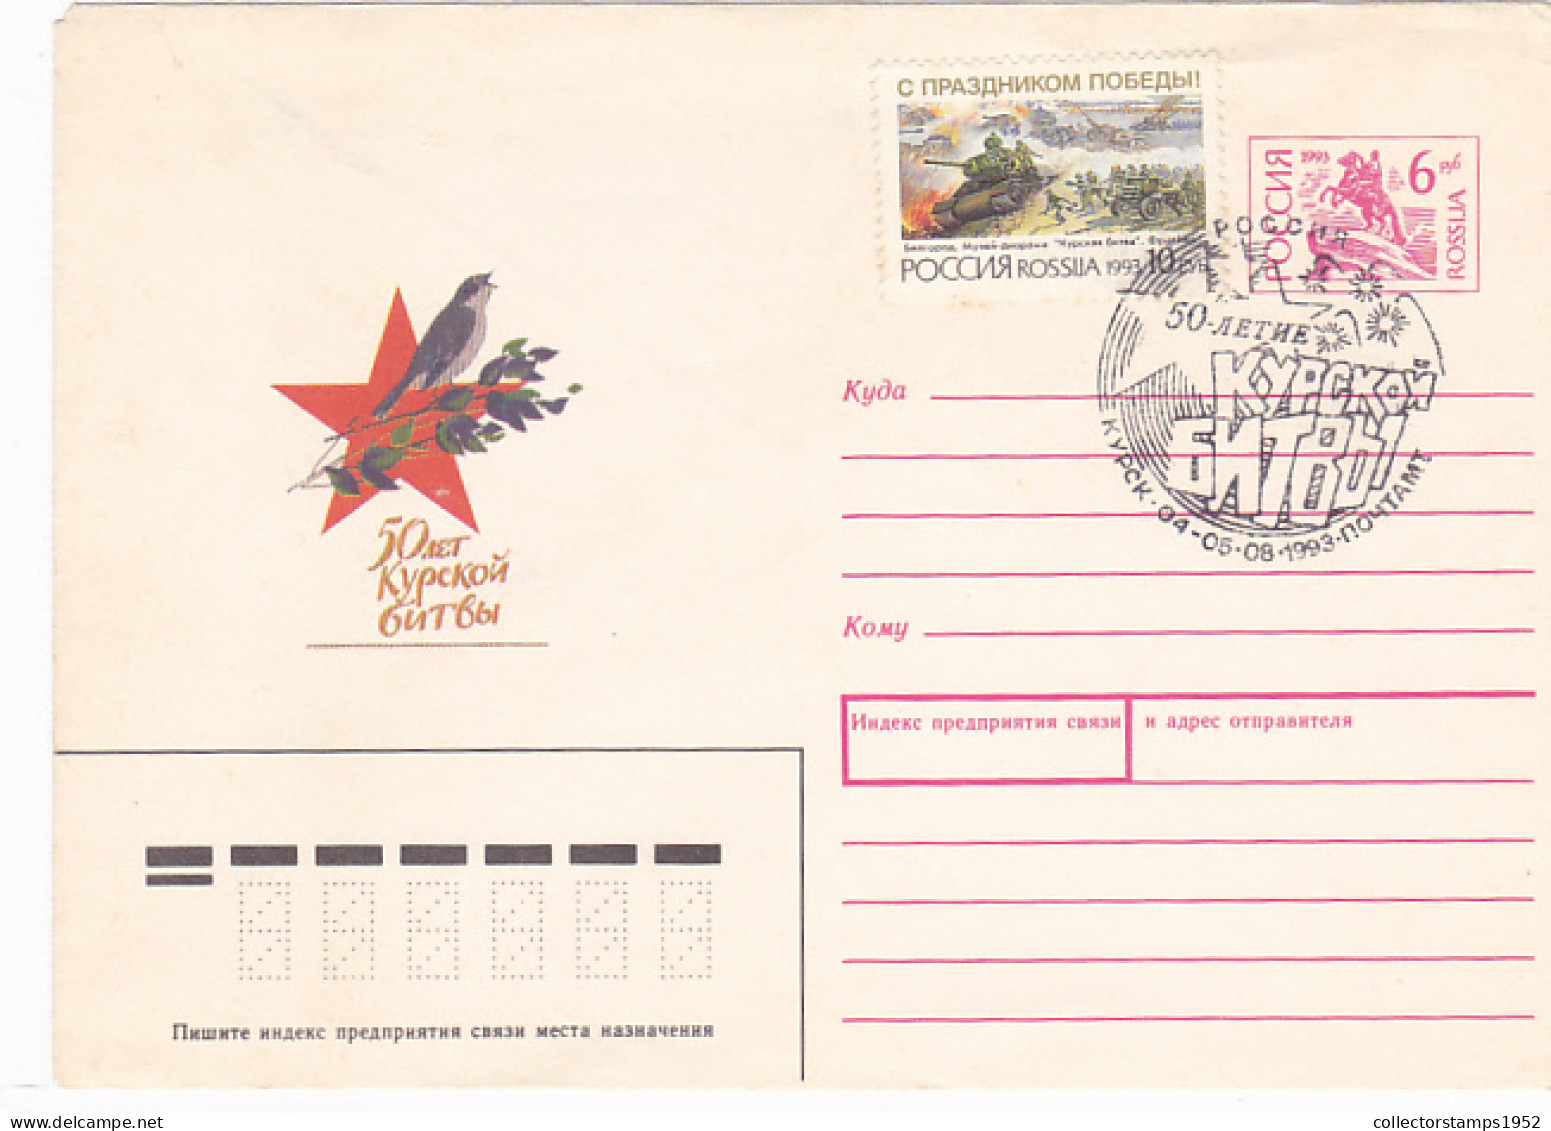 BATTLE OF KURSK, WW2, COVER STATIONERY, 1993, RUSSIA - Stamped Stationery